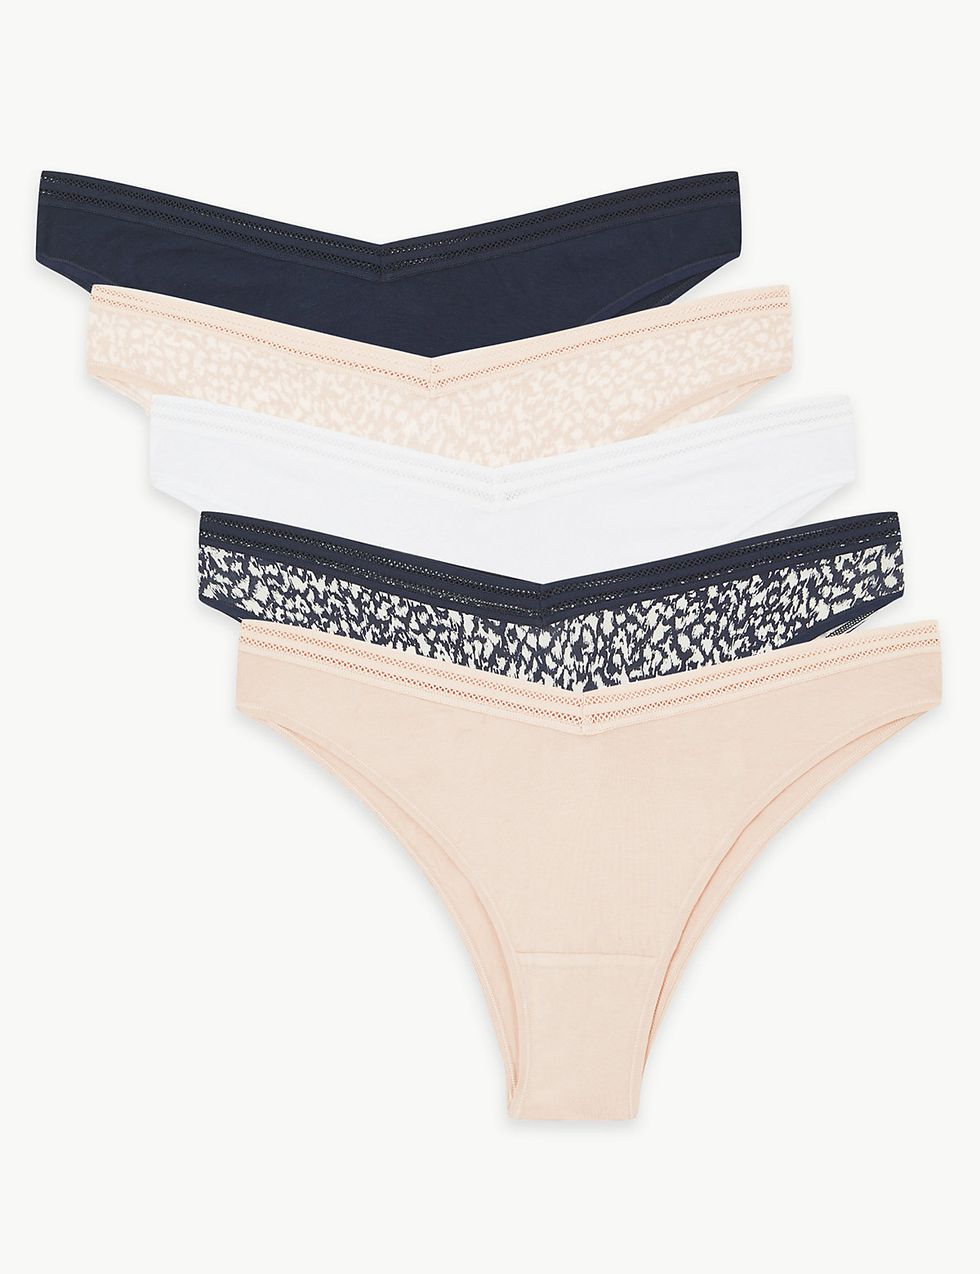 Marks & Spencer Miami knickers - M&S launches leg-lengthening underwear  style